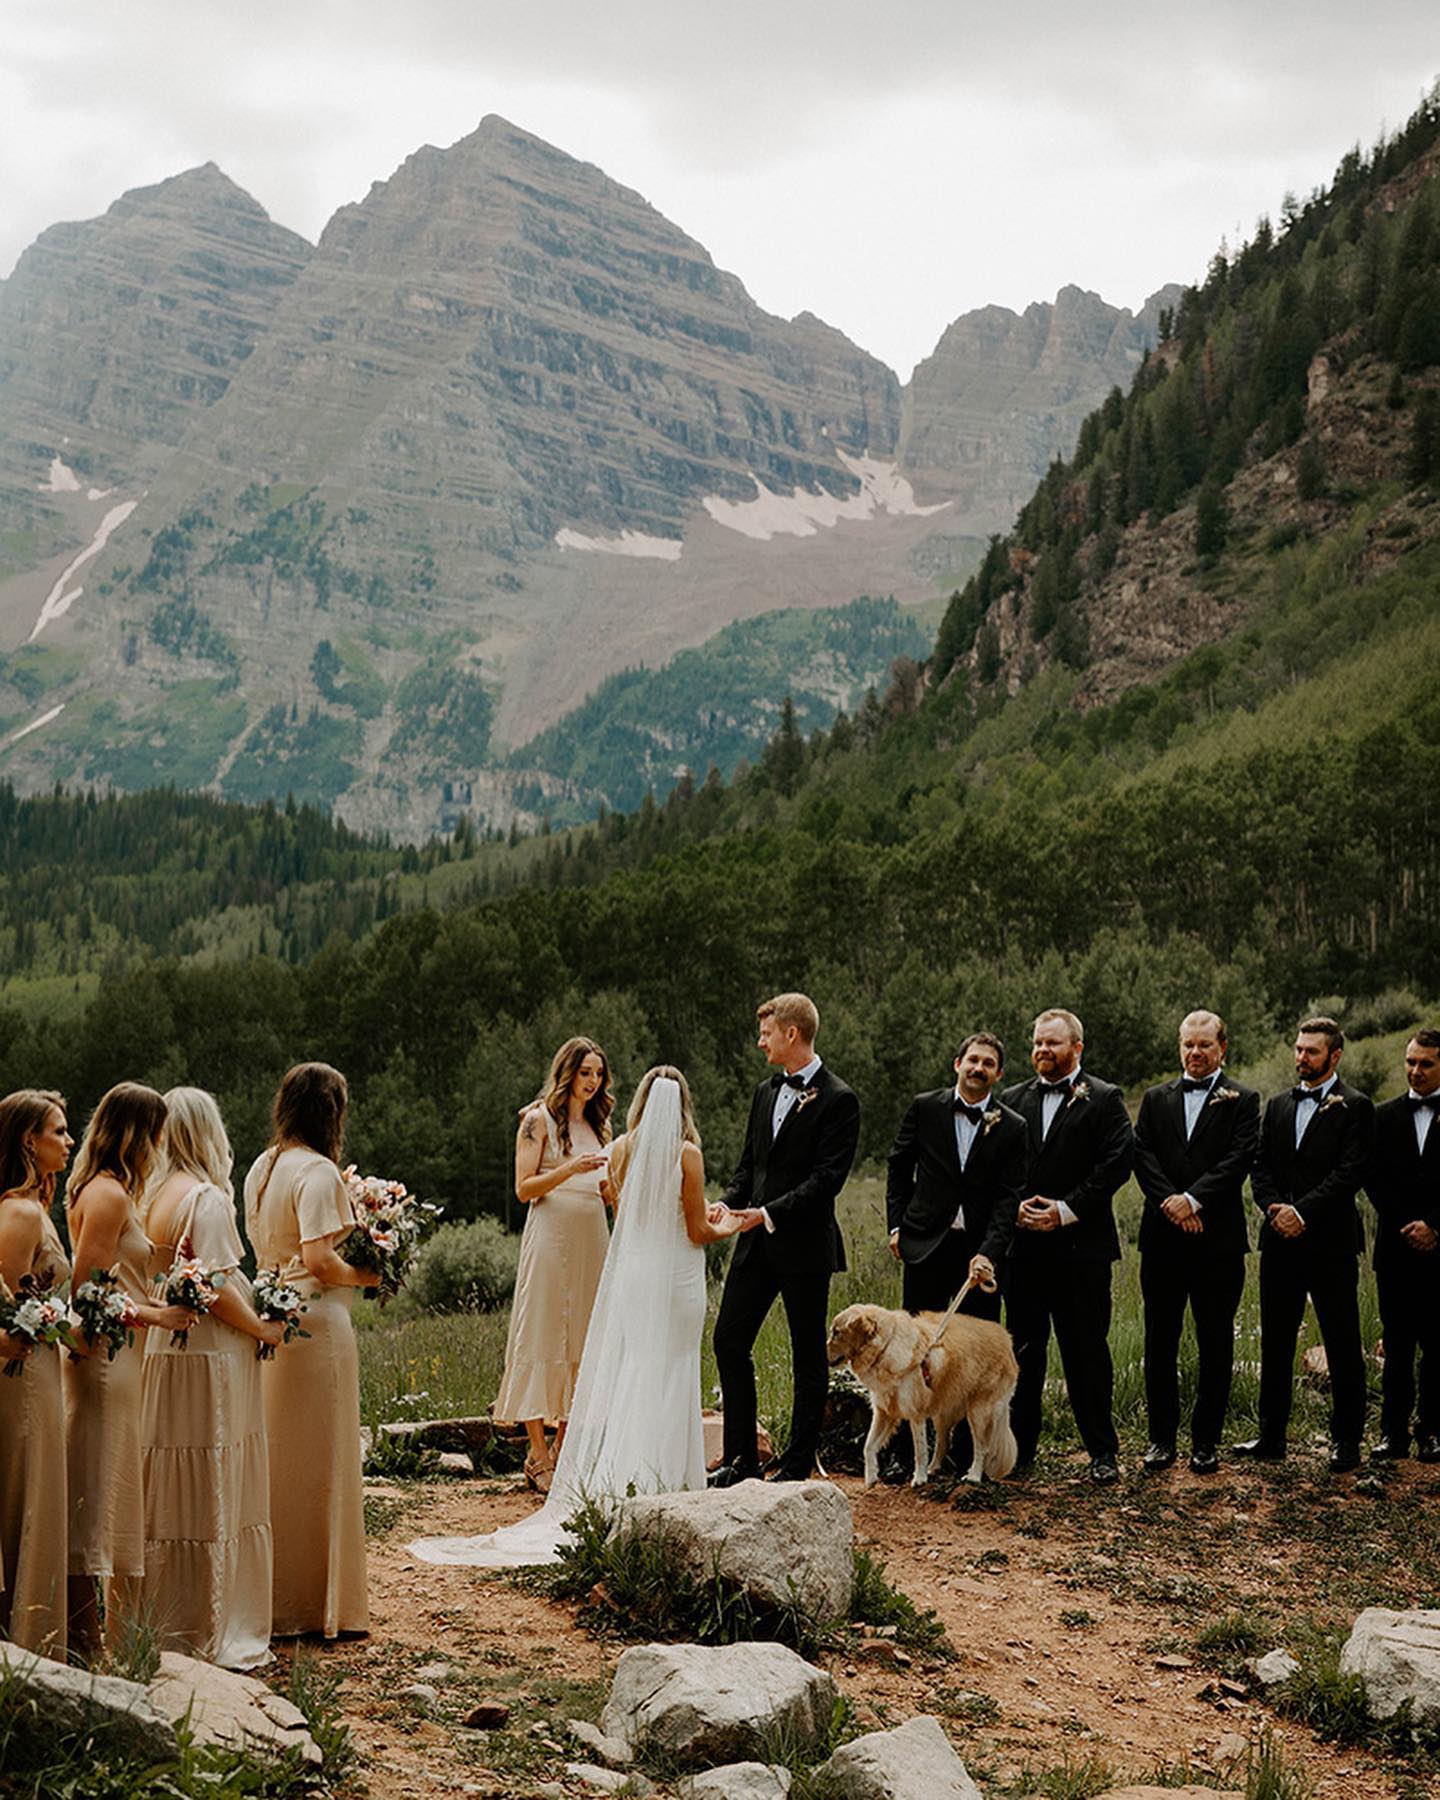 wedding ceremony in the mountains